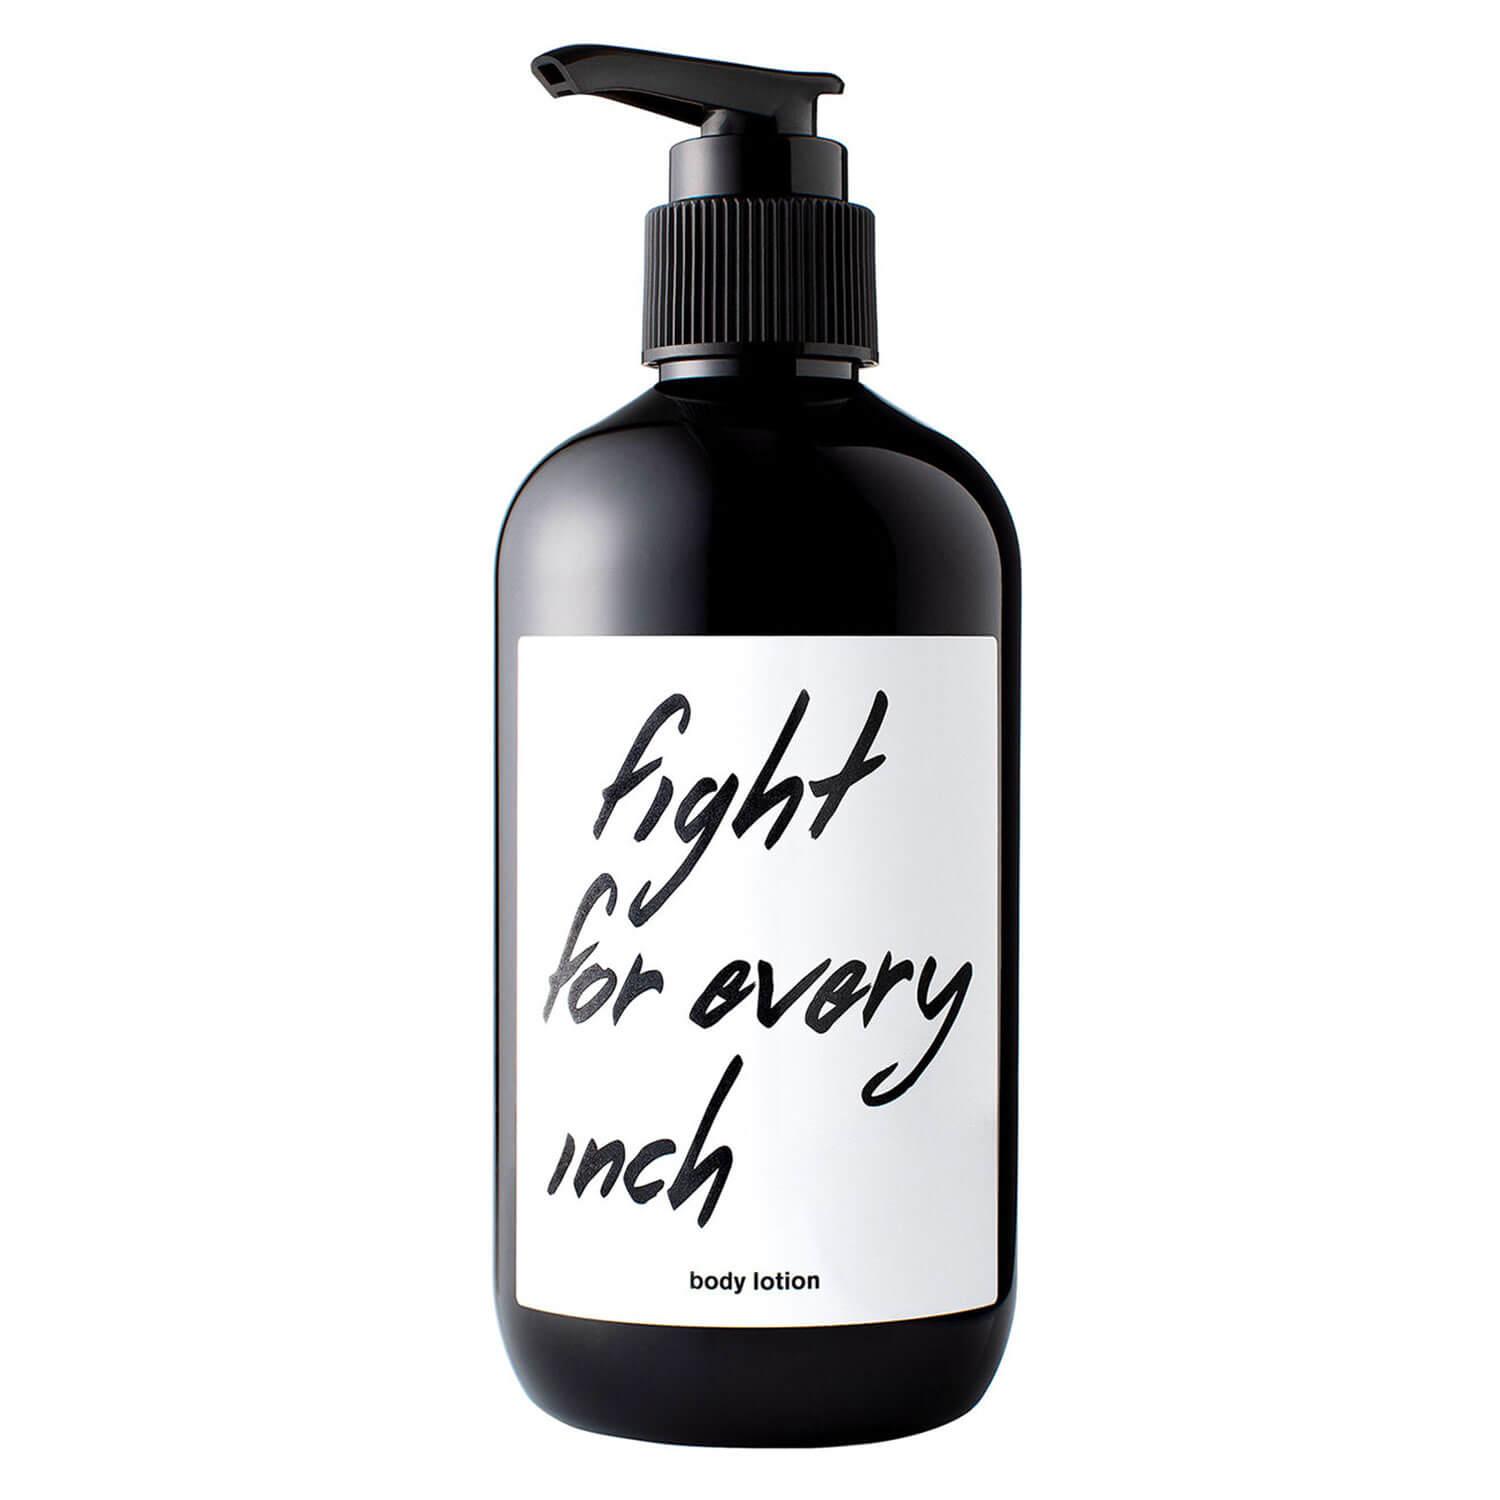 DOERS of London - Hand & Body Lotion